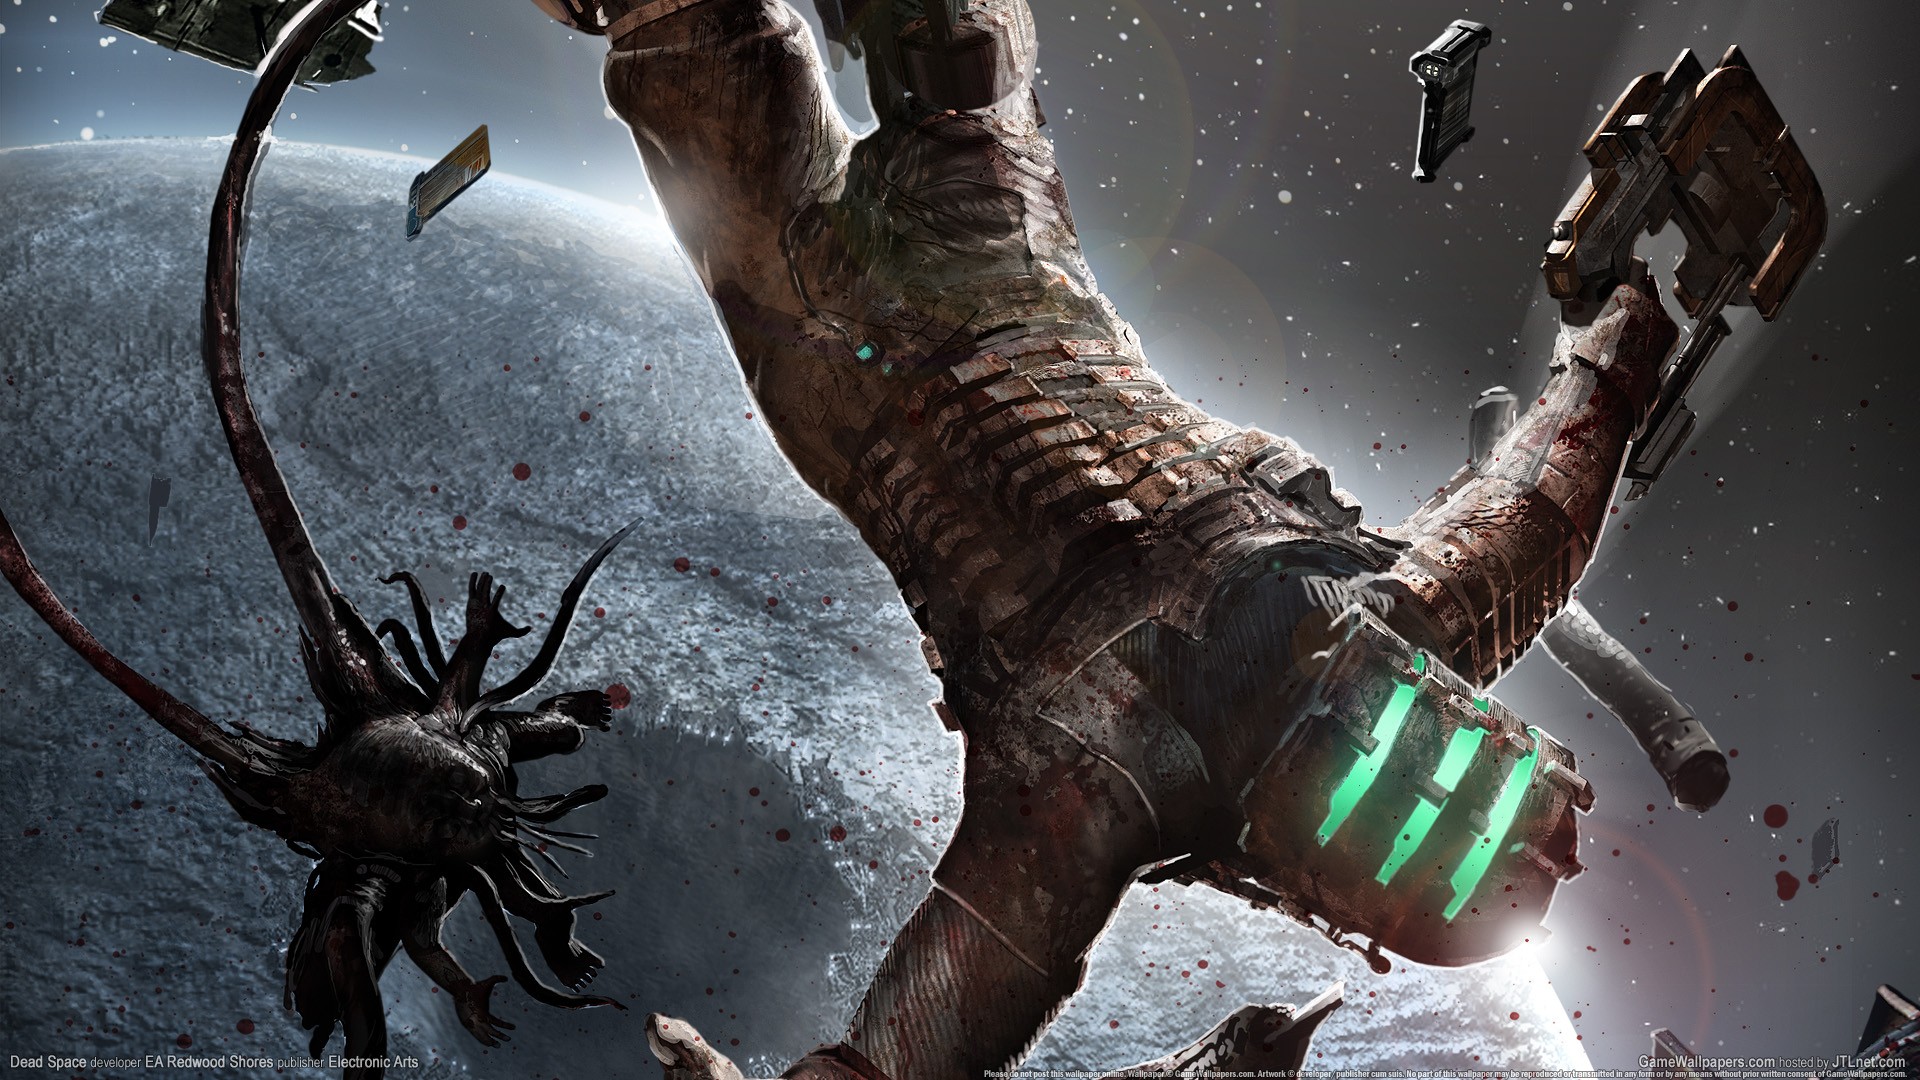 Dead Space Video Games Video Game Art Horror Science Fiction Space Video Game Heroes 1920x1080